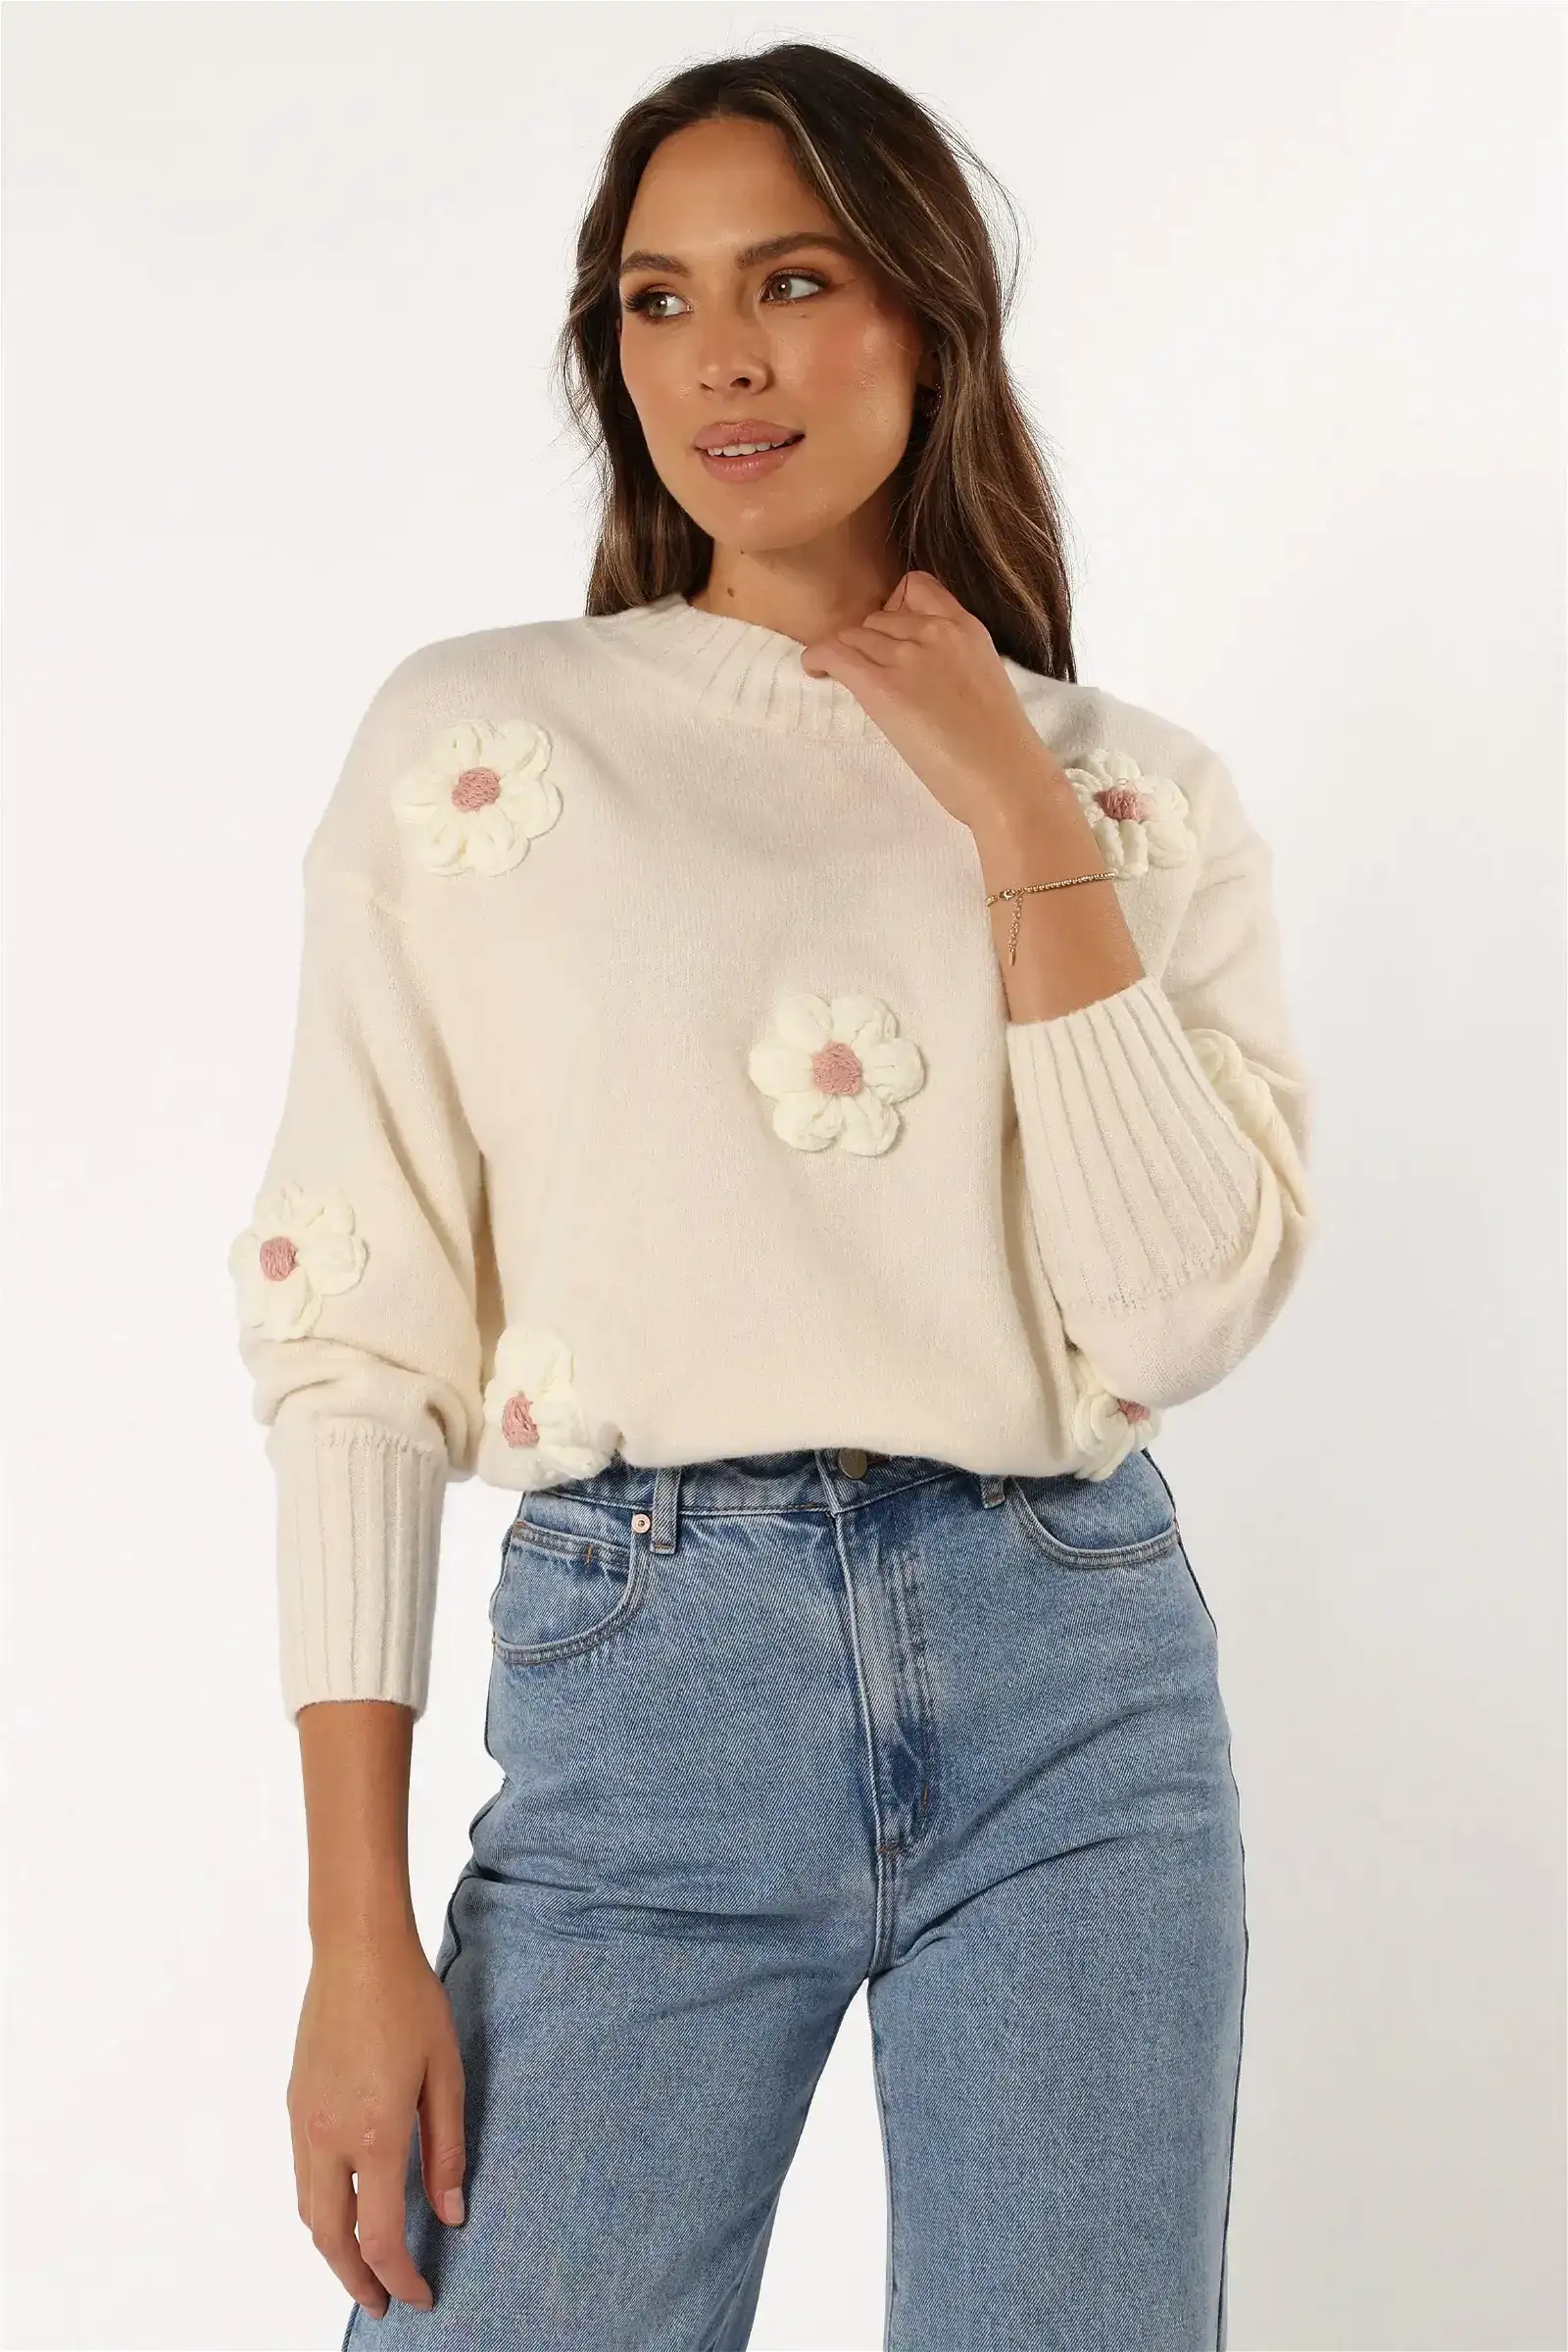 Image of Alto Flower Knit Sweater - White